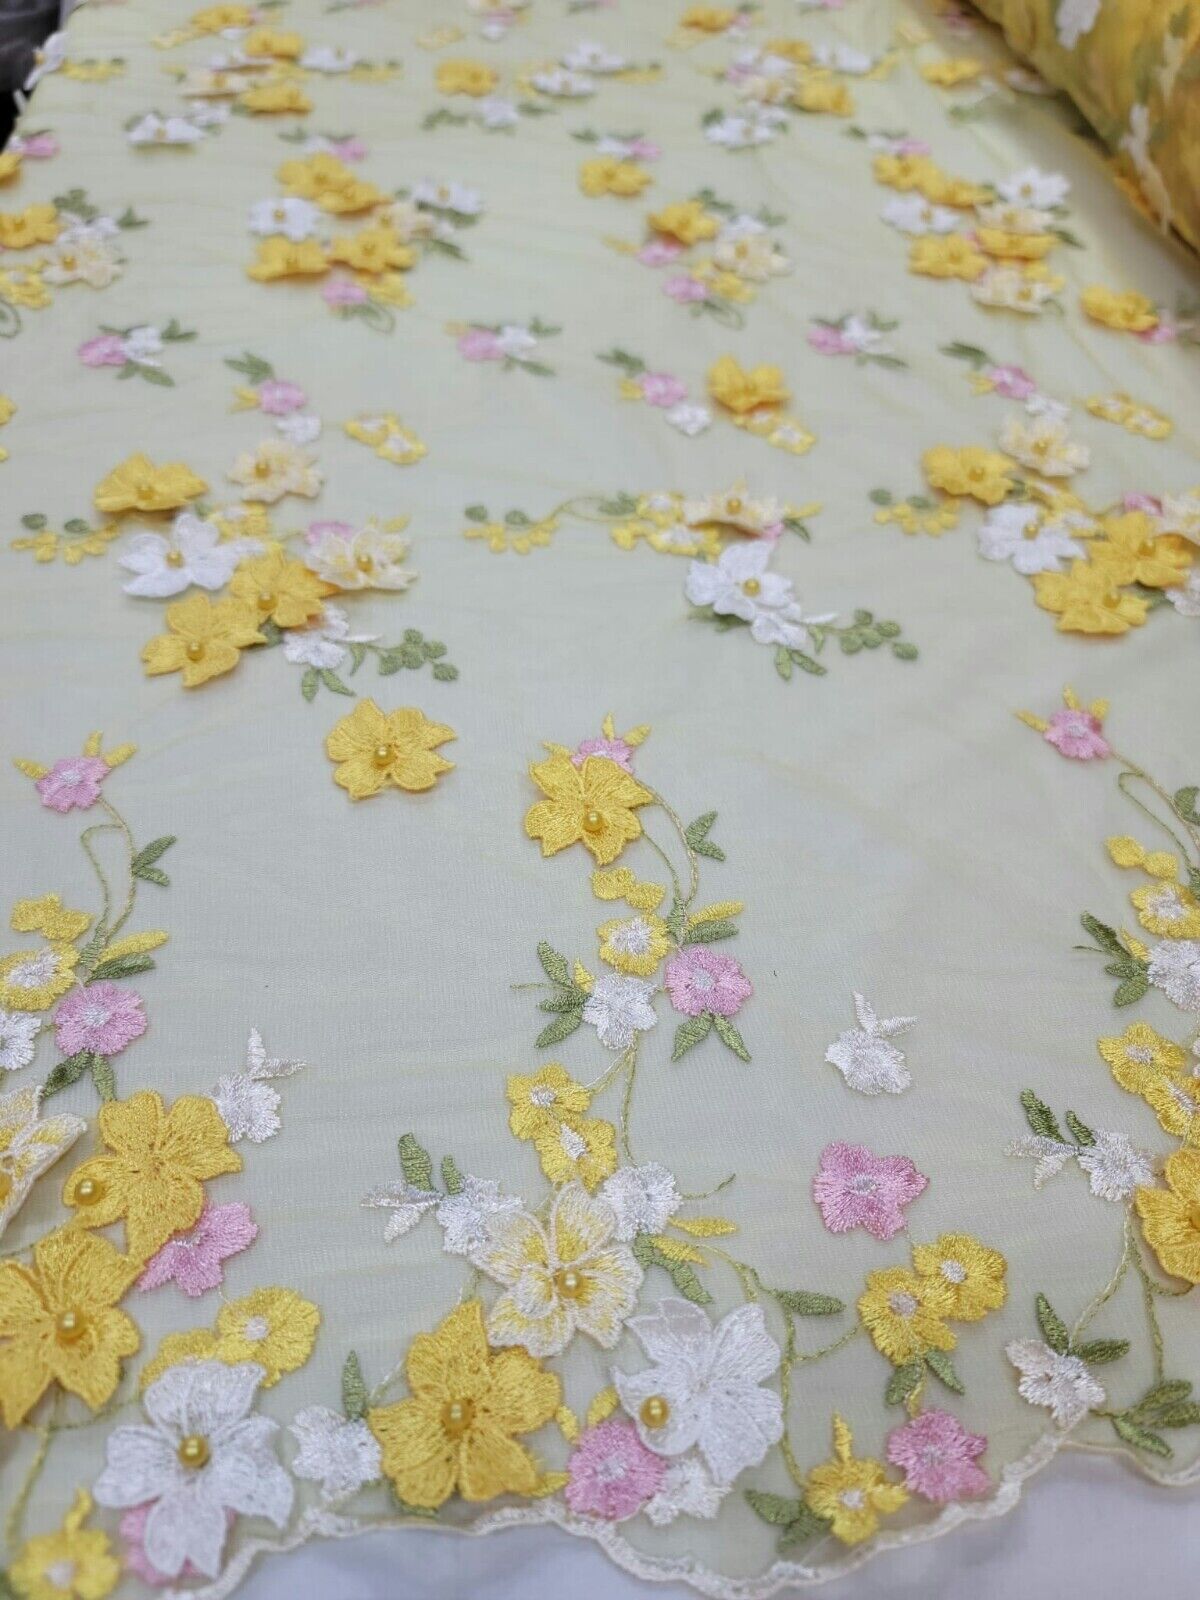 Yellow Lace 3D Floral Flowers Pink Embroidery Fabric - Sold By The Yard - Perfect for Quinceañera Dresses